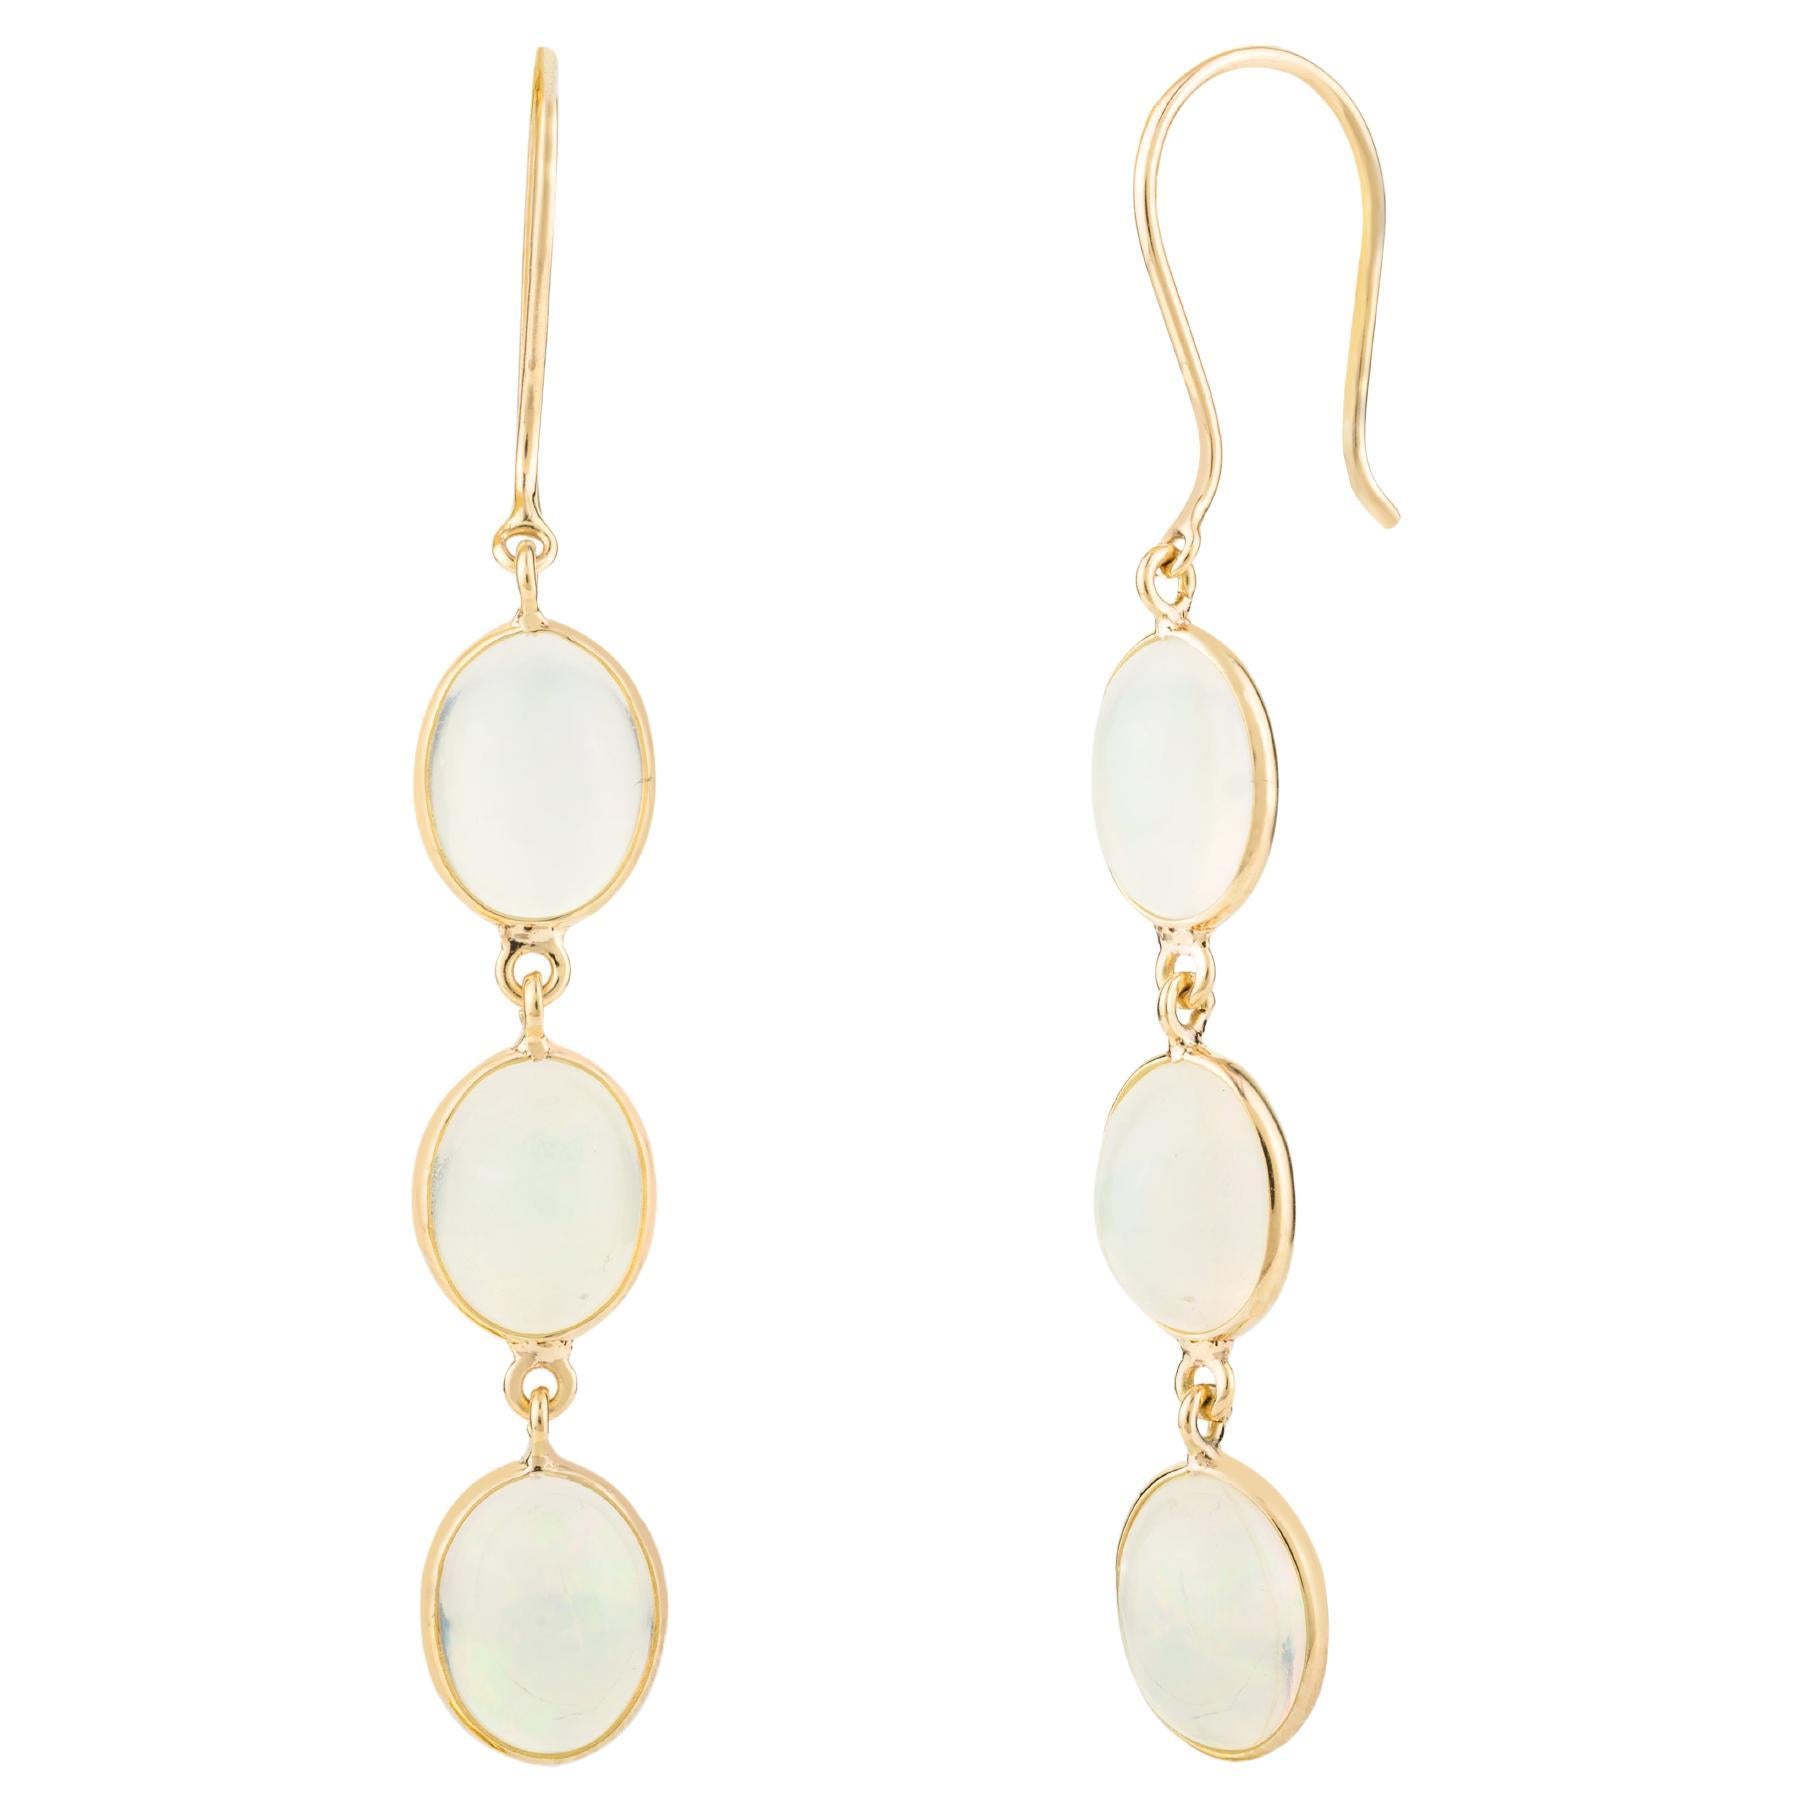 Natural Opal Gemstone Drop Earrings in 18k Solid Yellow Gold for Women